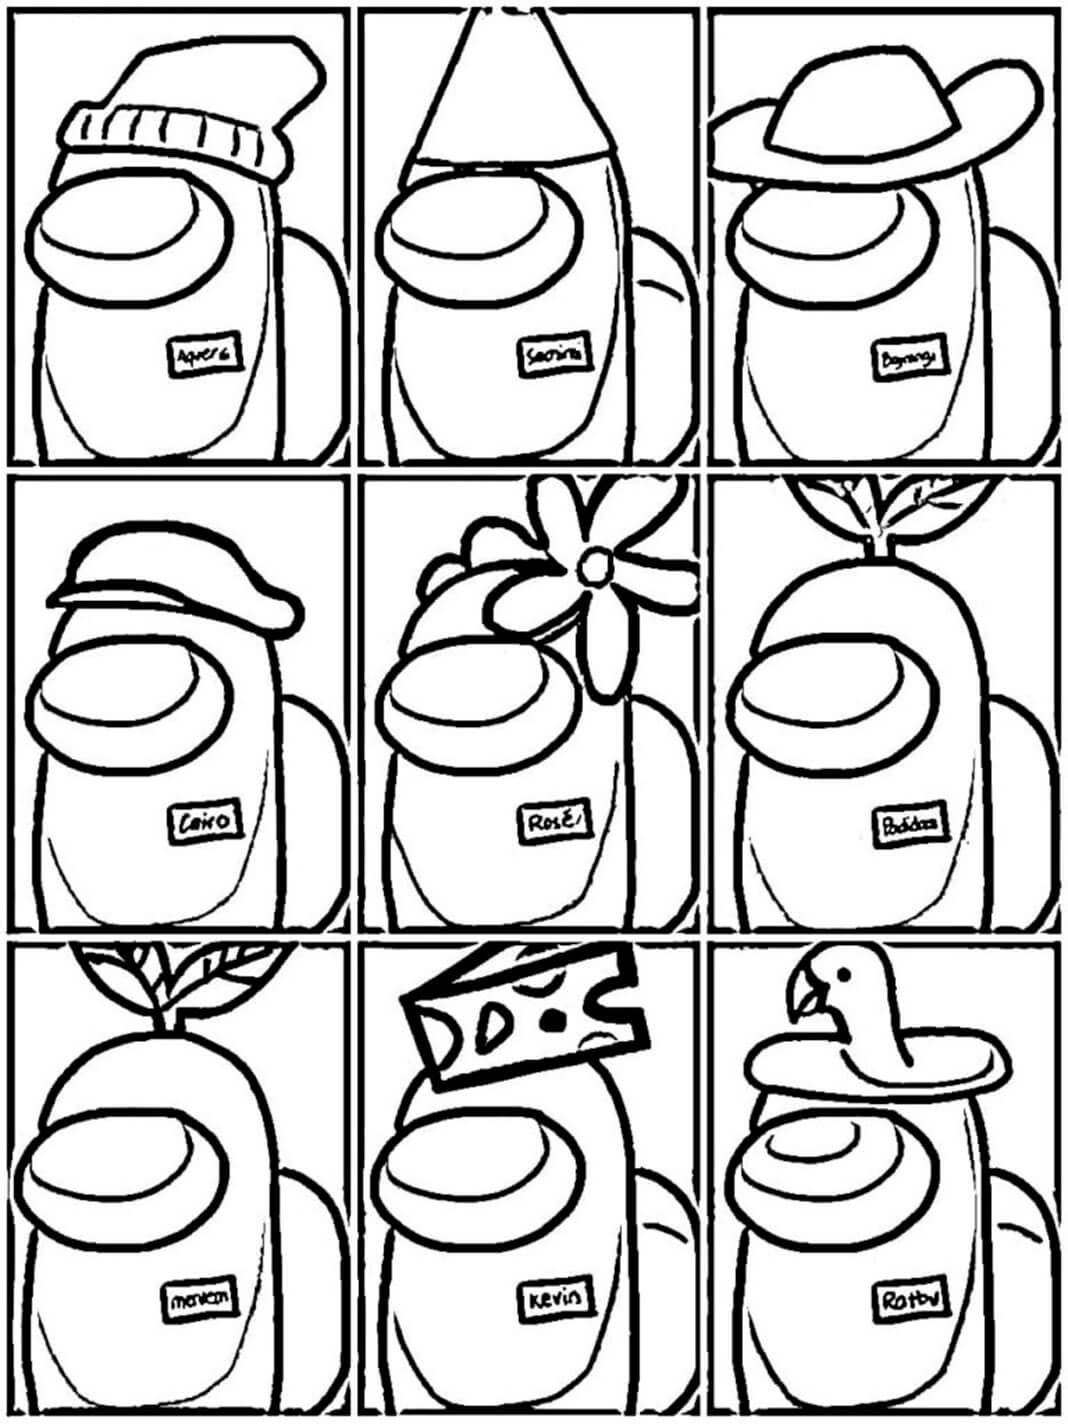 Among Us Banana Coloring Page   Free Printable Coloring Pages for Kids